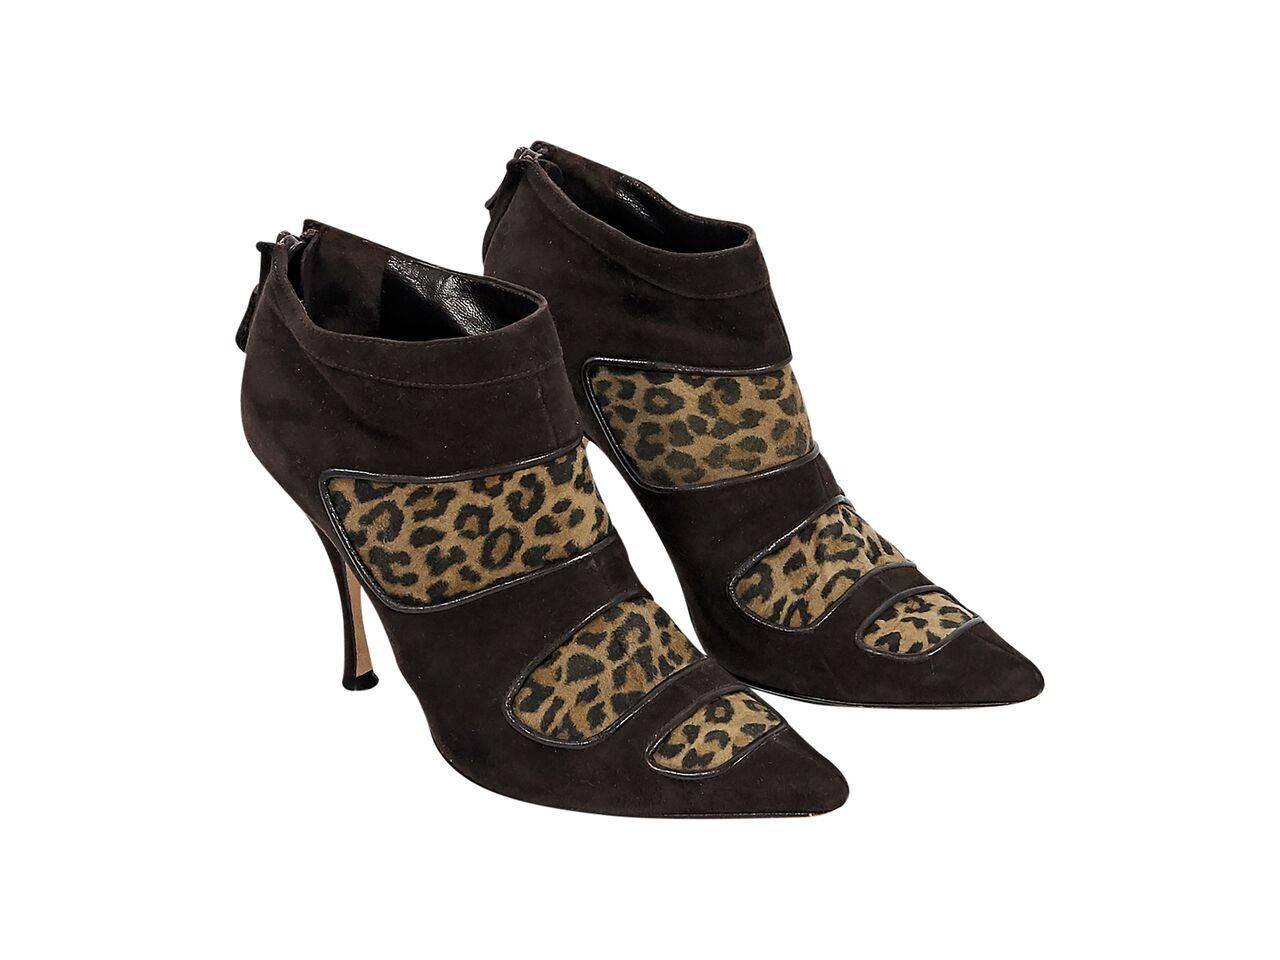 Product details:  Brown suede ankle boots by Manolo Blahnik.  Inset leopard-print panels.  Point toe.  Back zip closure. 
Condition: Pre-owned. Very good.
Est. Retail $ 798.00